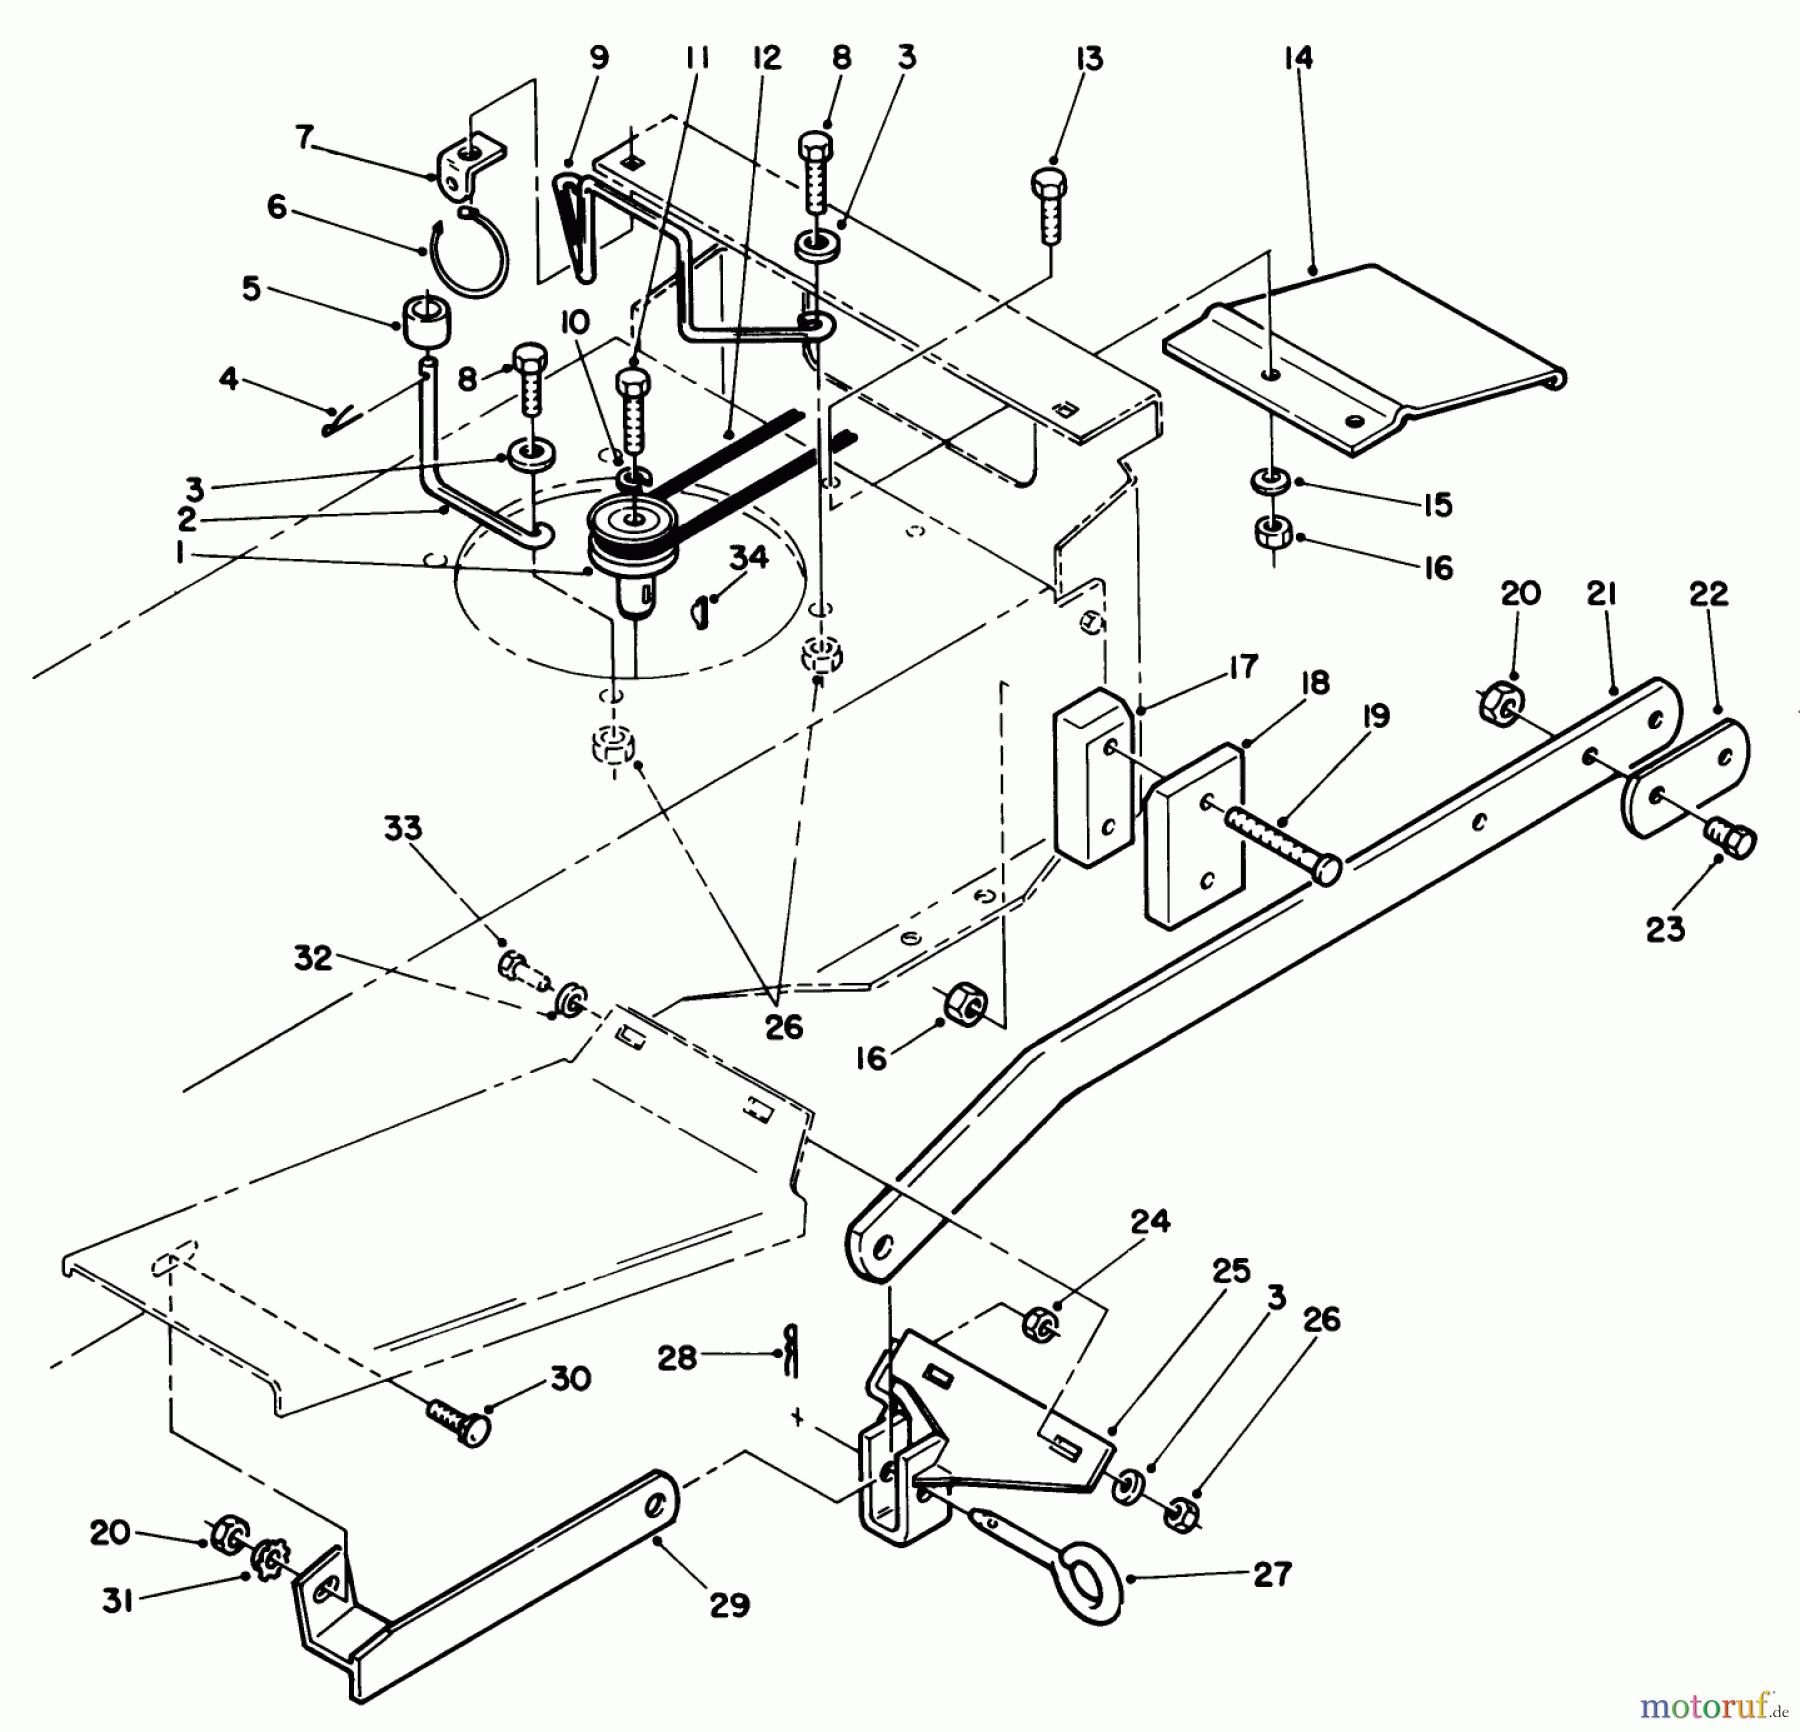  Toro Neu Mowers, Lawn & Garden Tractor Seite 2 R2-12OE01 (212-H) - Toro 212-H Tractor, 1991 (1000001-1999999) SWEEPER P.T.O. ASSEMBLY (212-H)